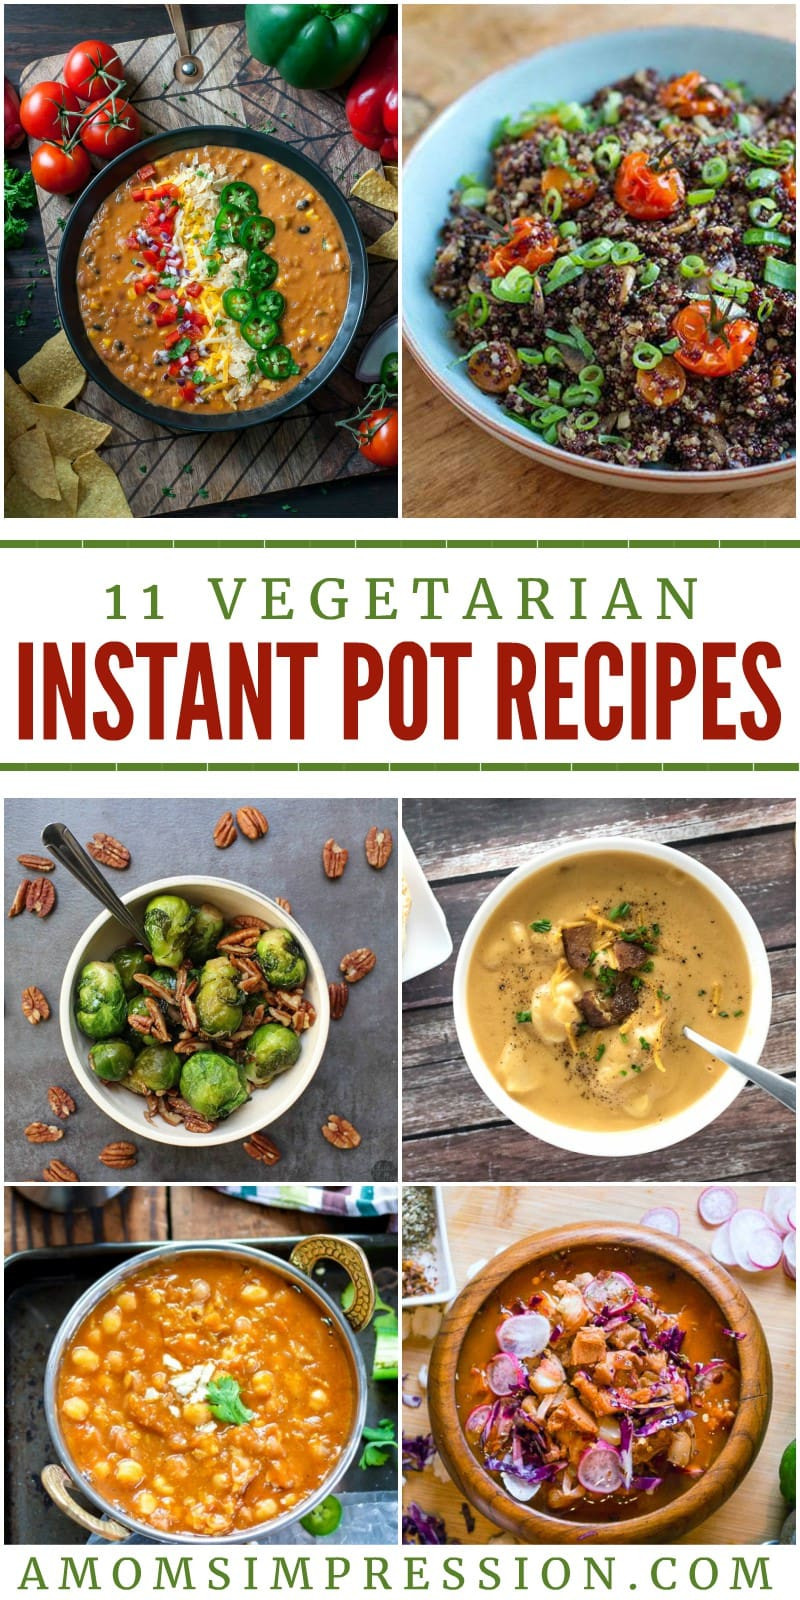 Instapot Recipes Vegetarian
 11 Exciting Ve arian Instant Pot Recipes Everyone will Love